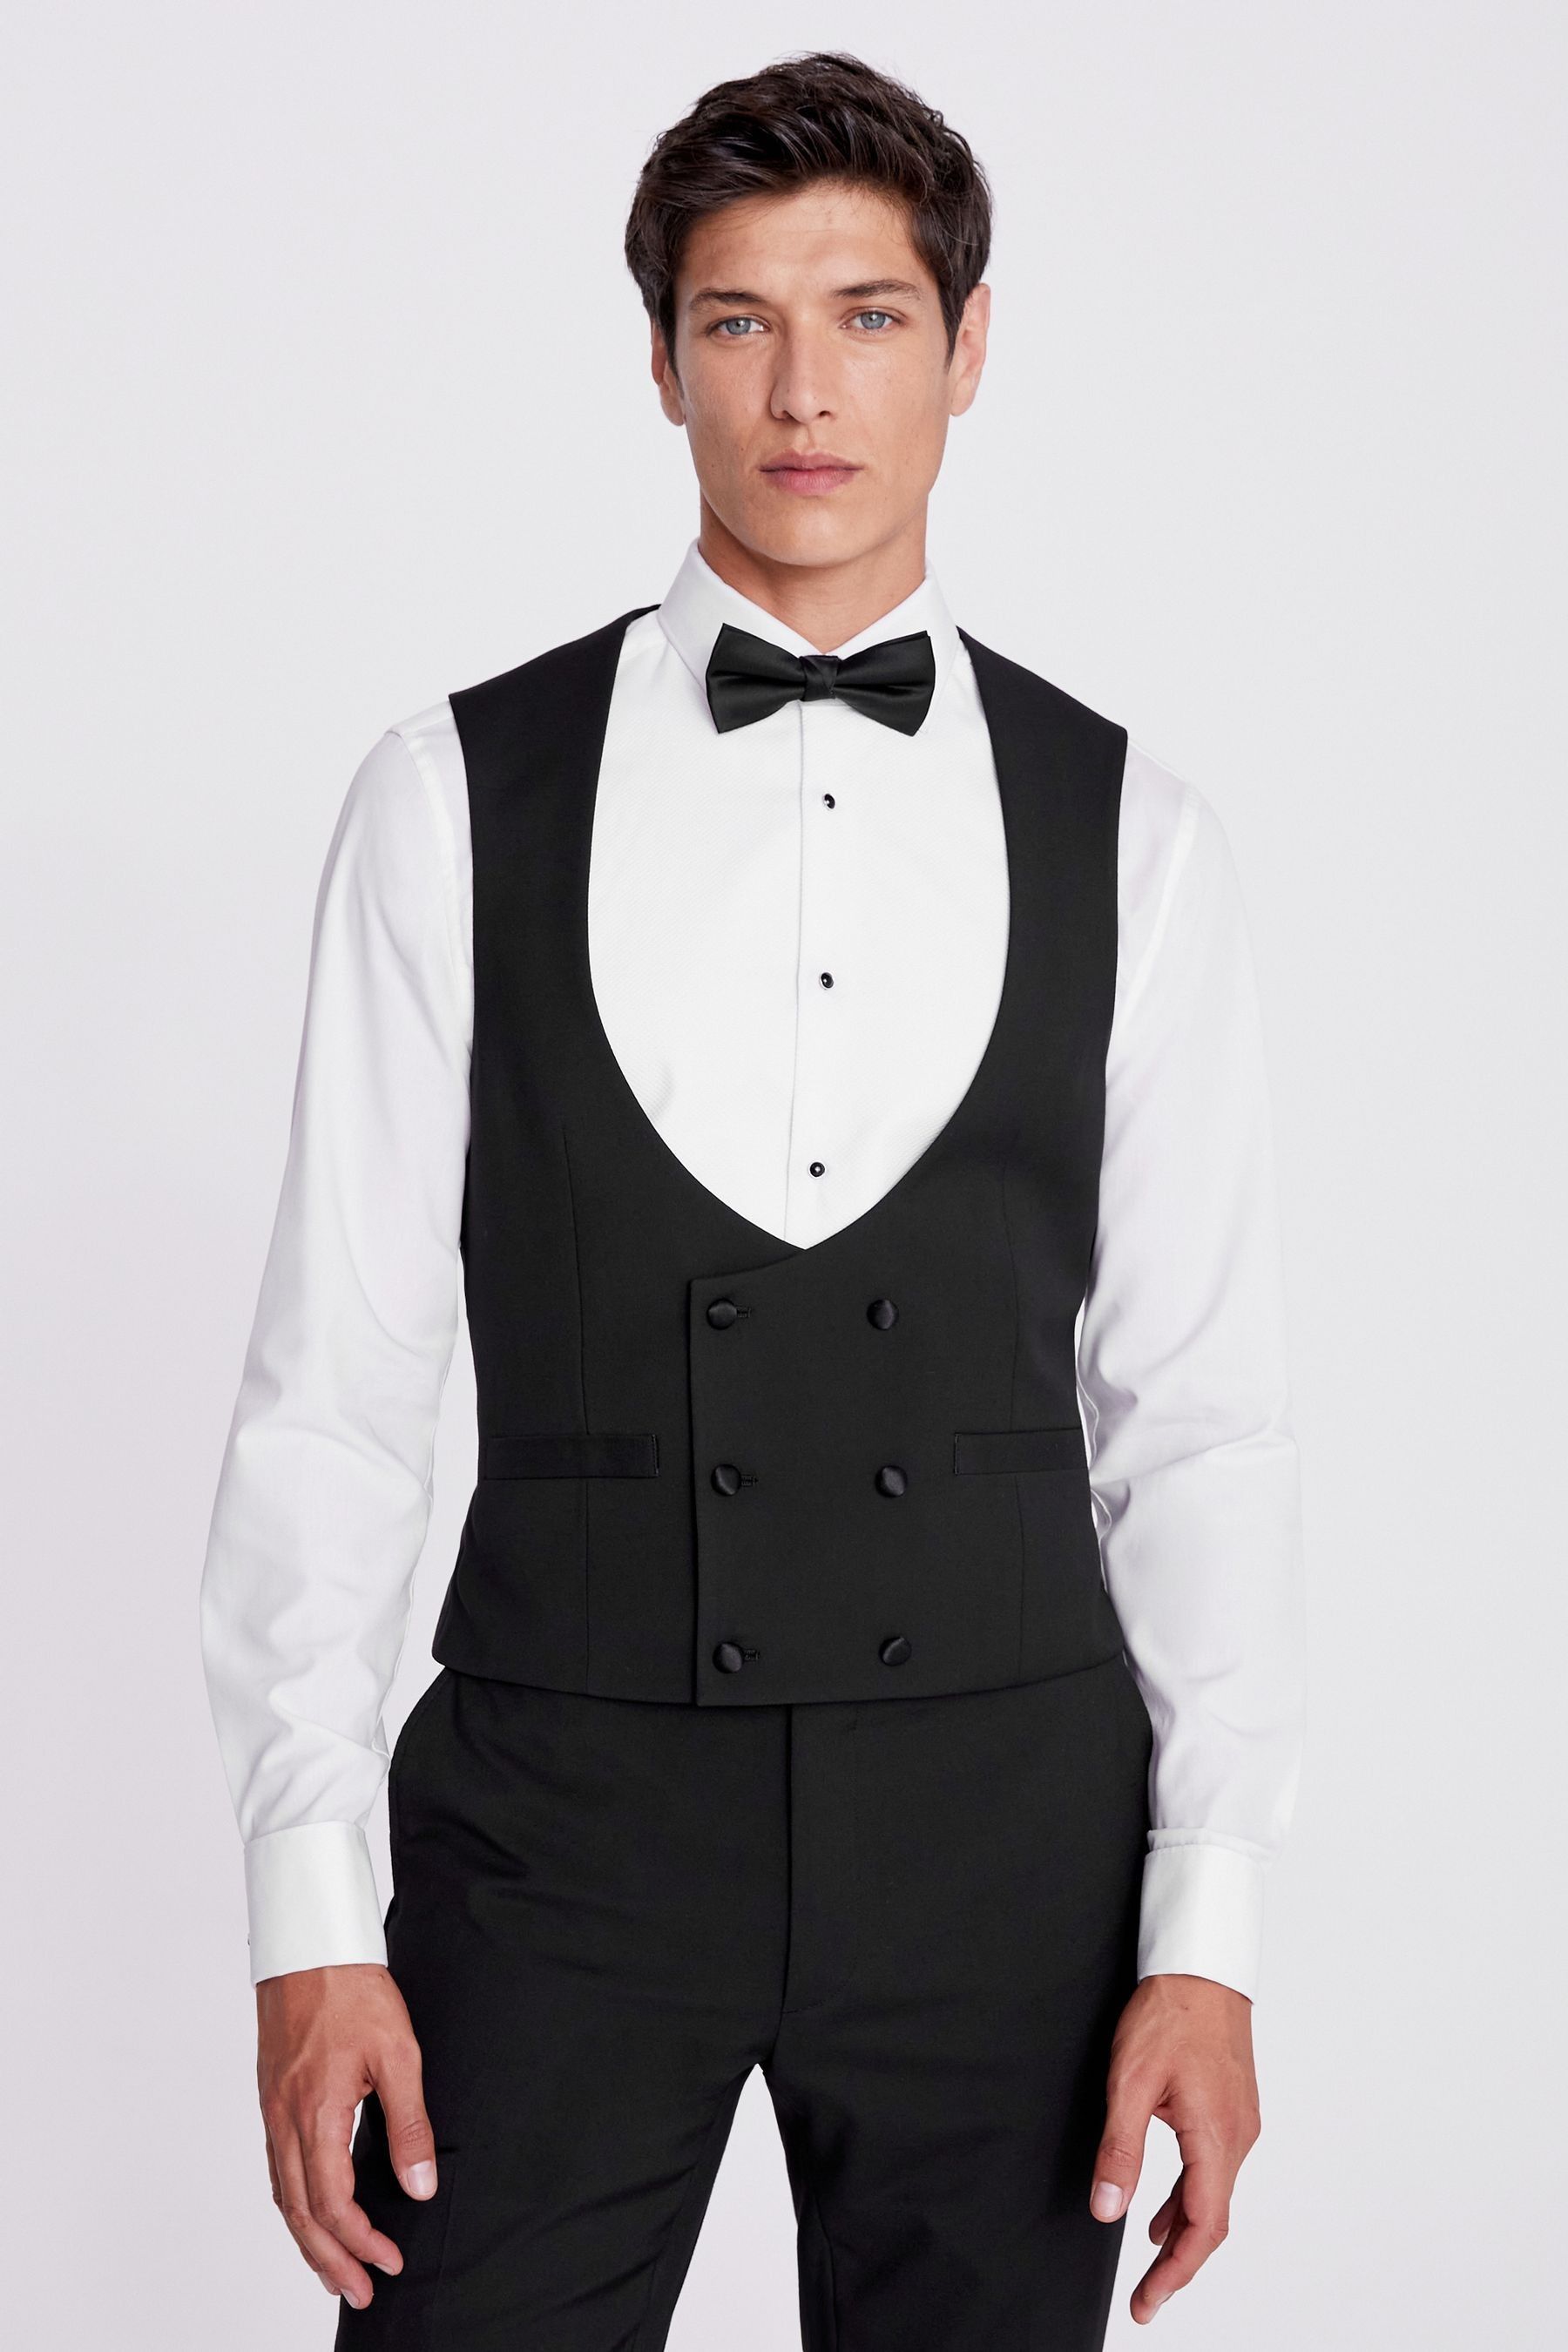 Buy MOSS Slim Fit Black Waistcoat from the Next UK online shop